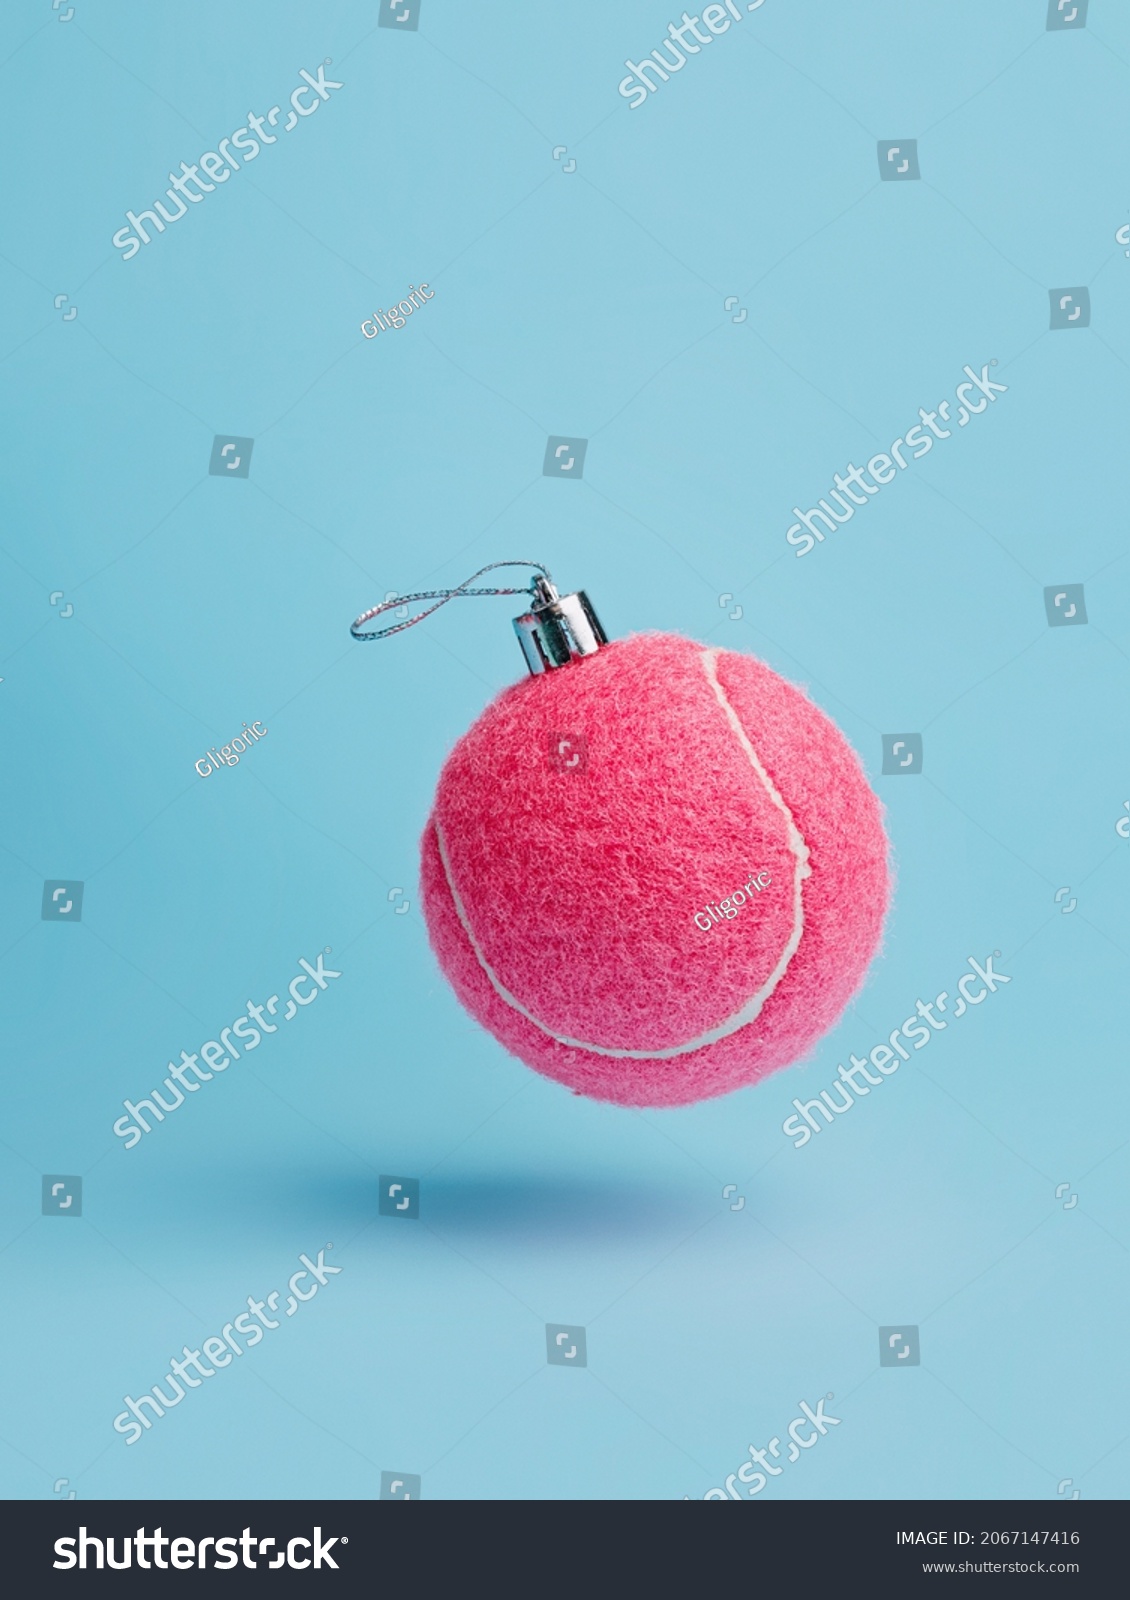 Creative Christmas layout made with flying pink tennis ball as a tree ornament vibrant red on pastel blue background. Minimal Xmas or New Year celebration concept. Minimal winter holidays idea.	 #2067147416